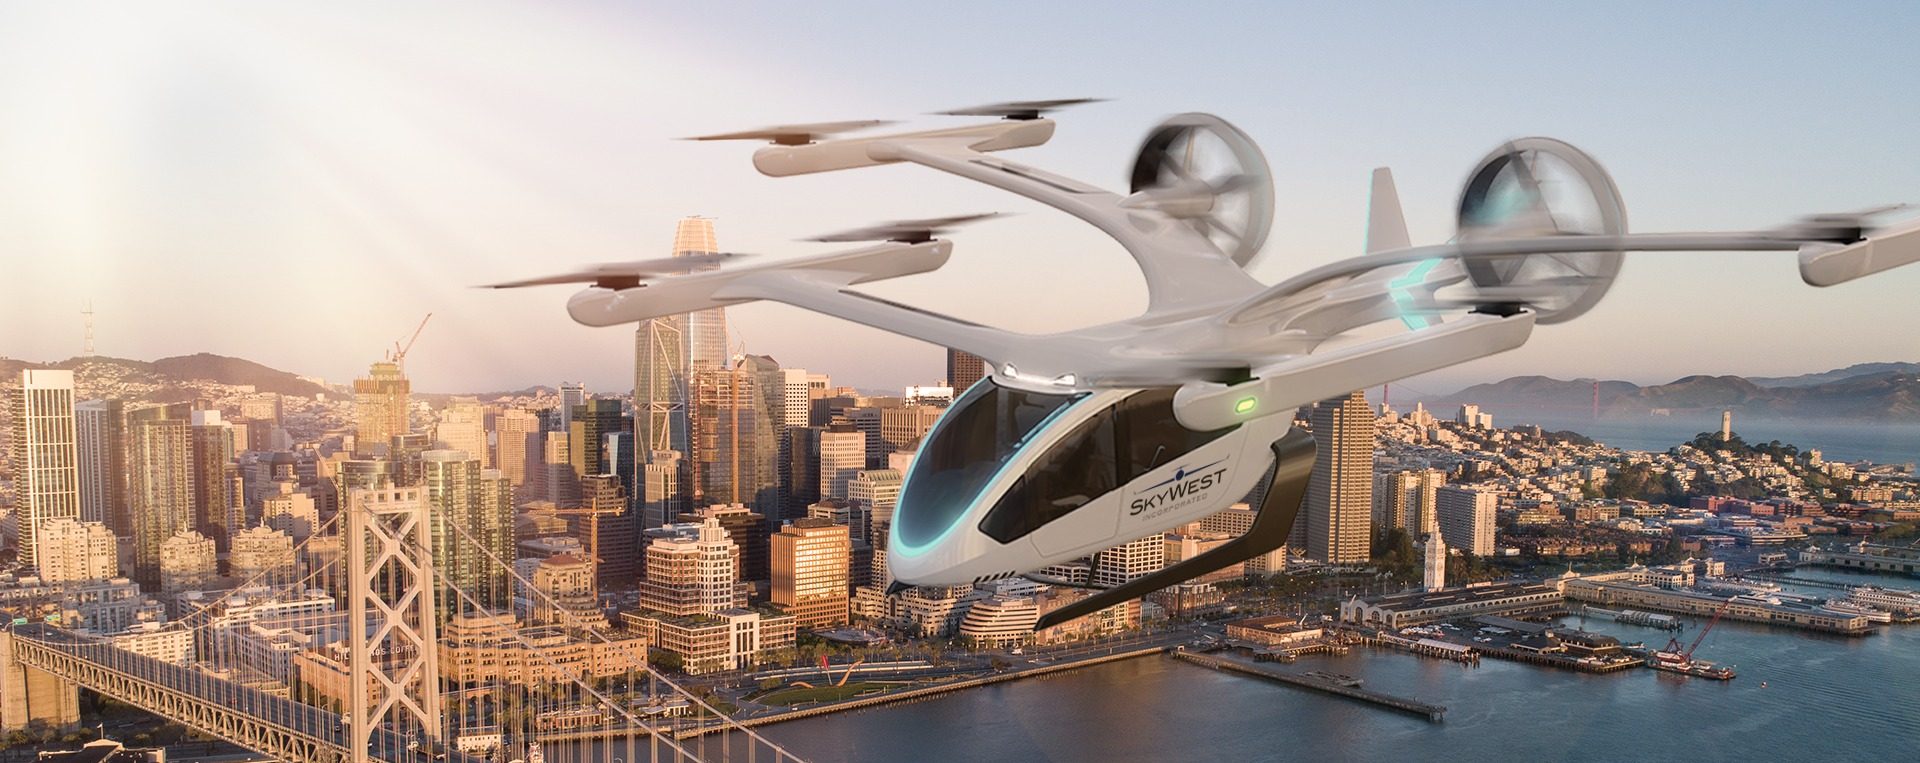 Eve and SkyWest Announce Partnership to Develop Regional Operator Network with an order for 100 eVTOL aircraft